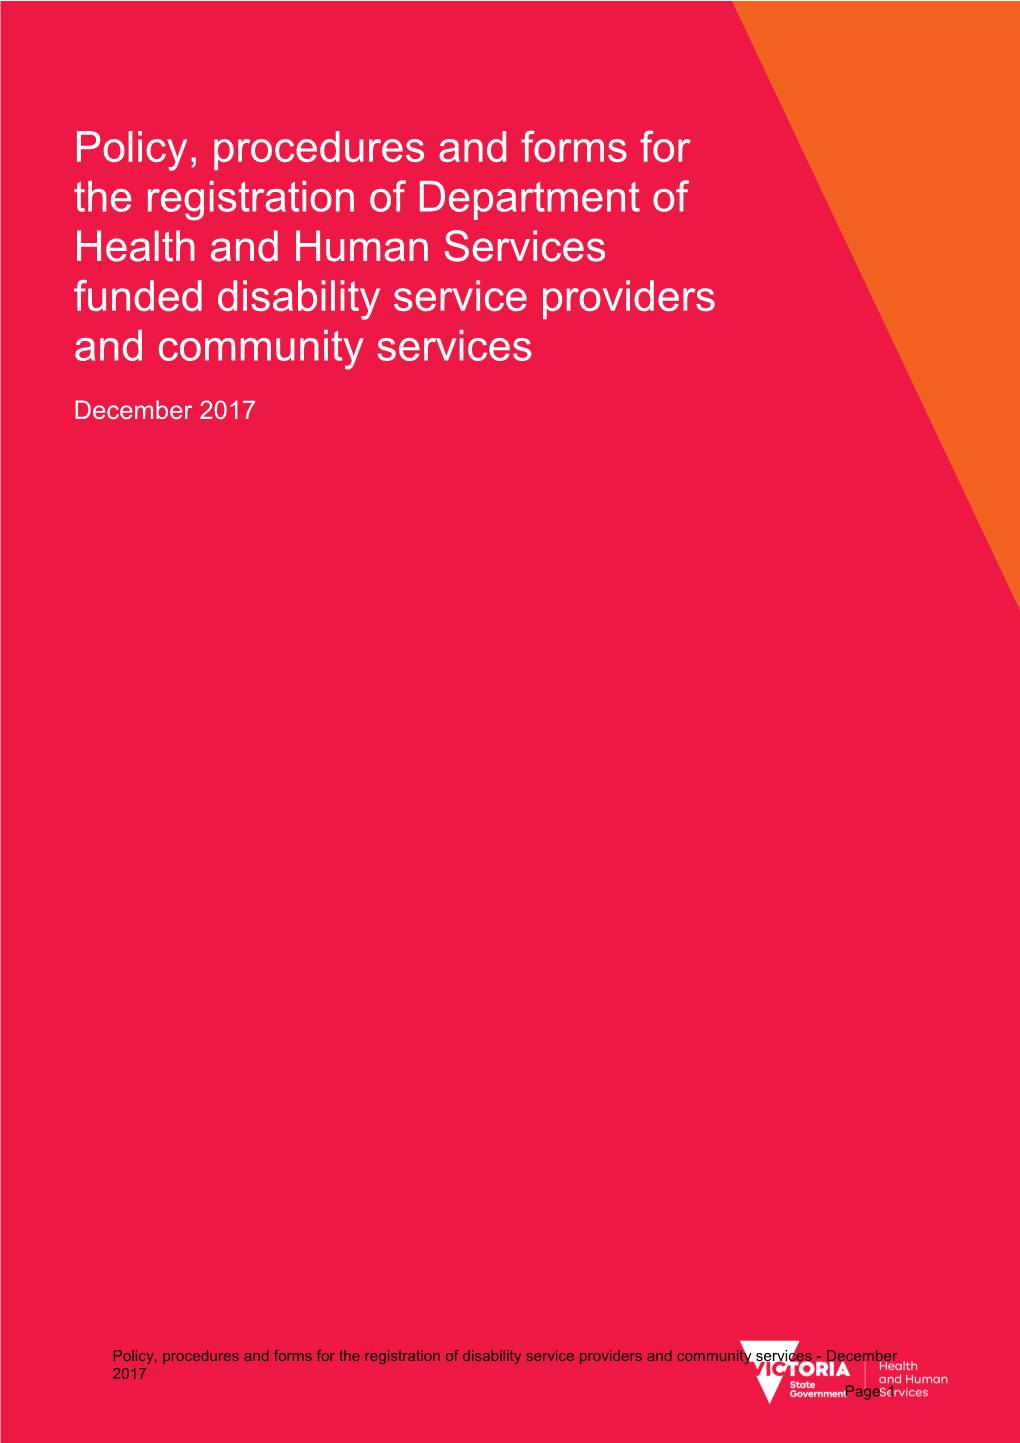 Policy, Procedures and Forms for the Registration of Department of Health and Human Services